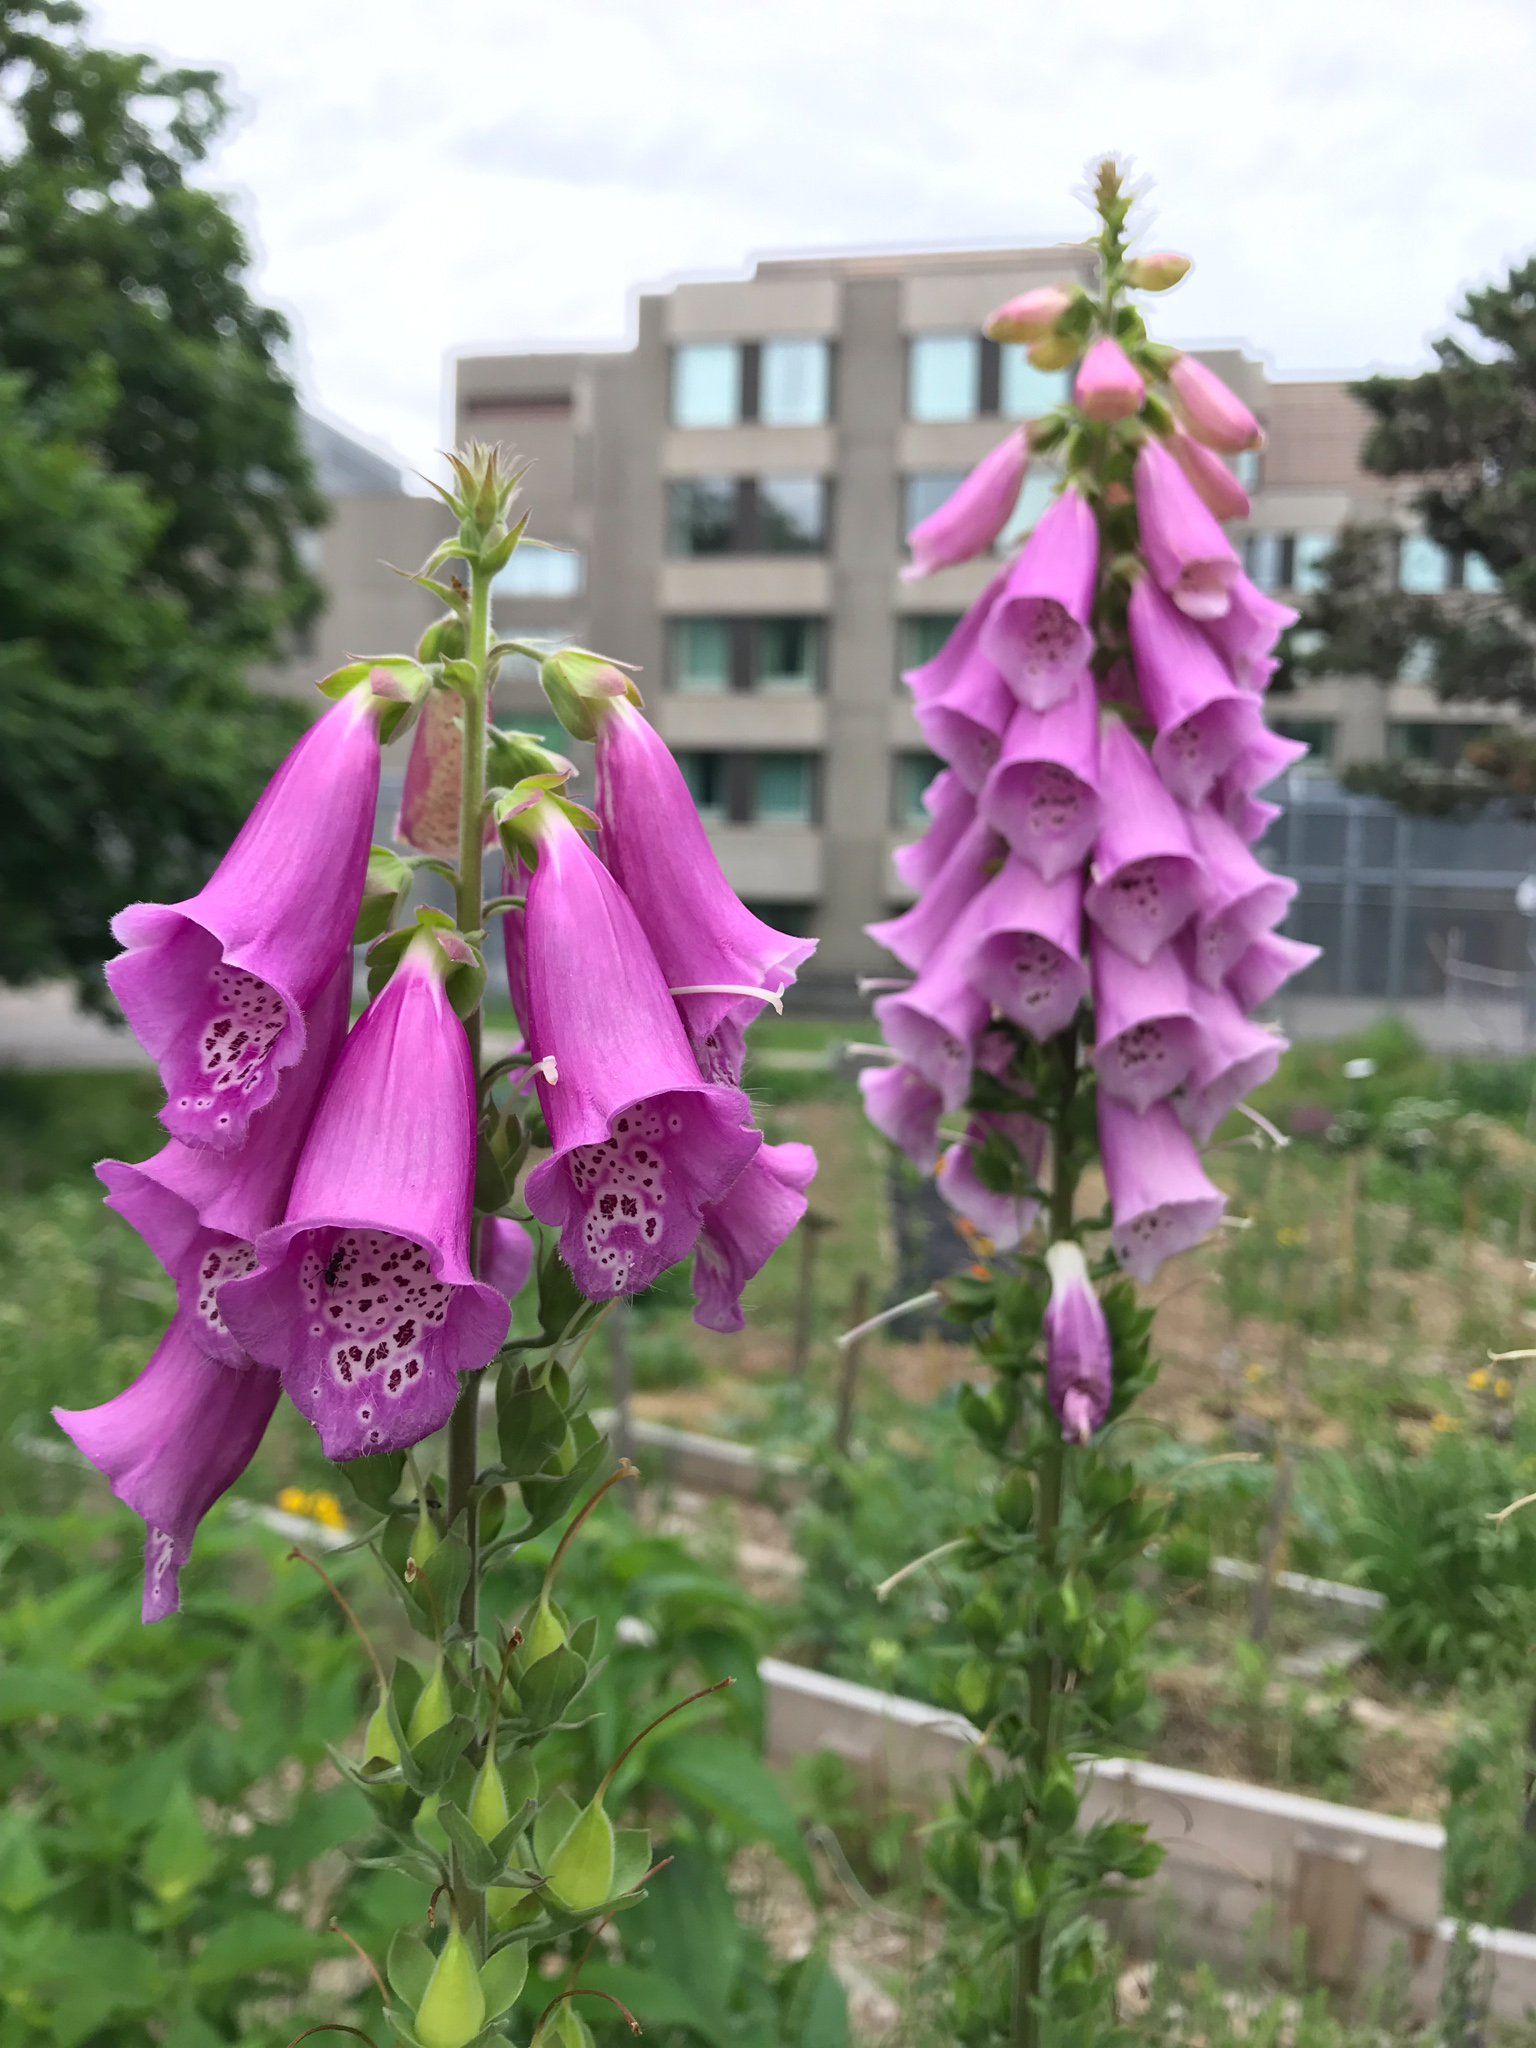 Foxgloves at the theraputic garden